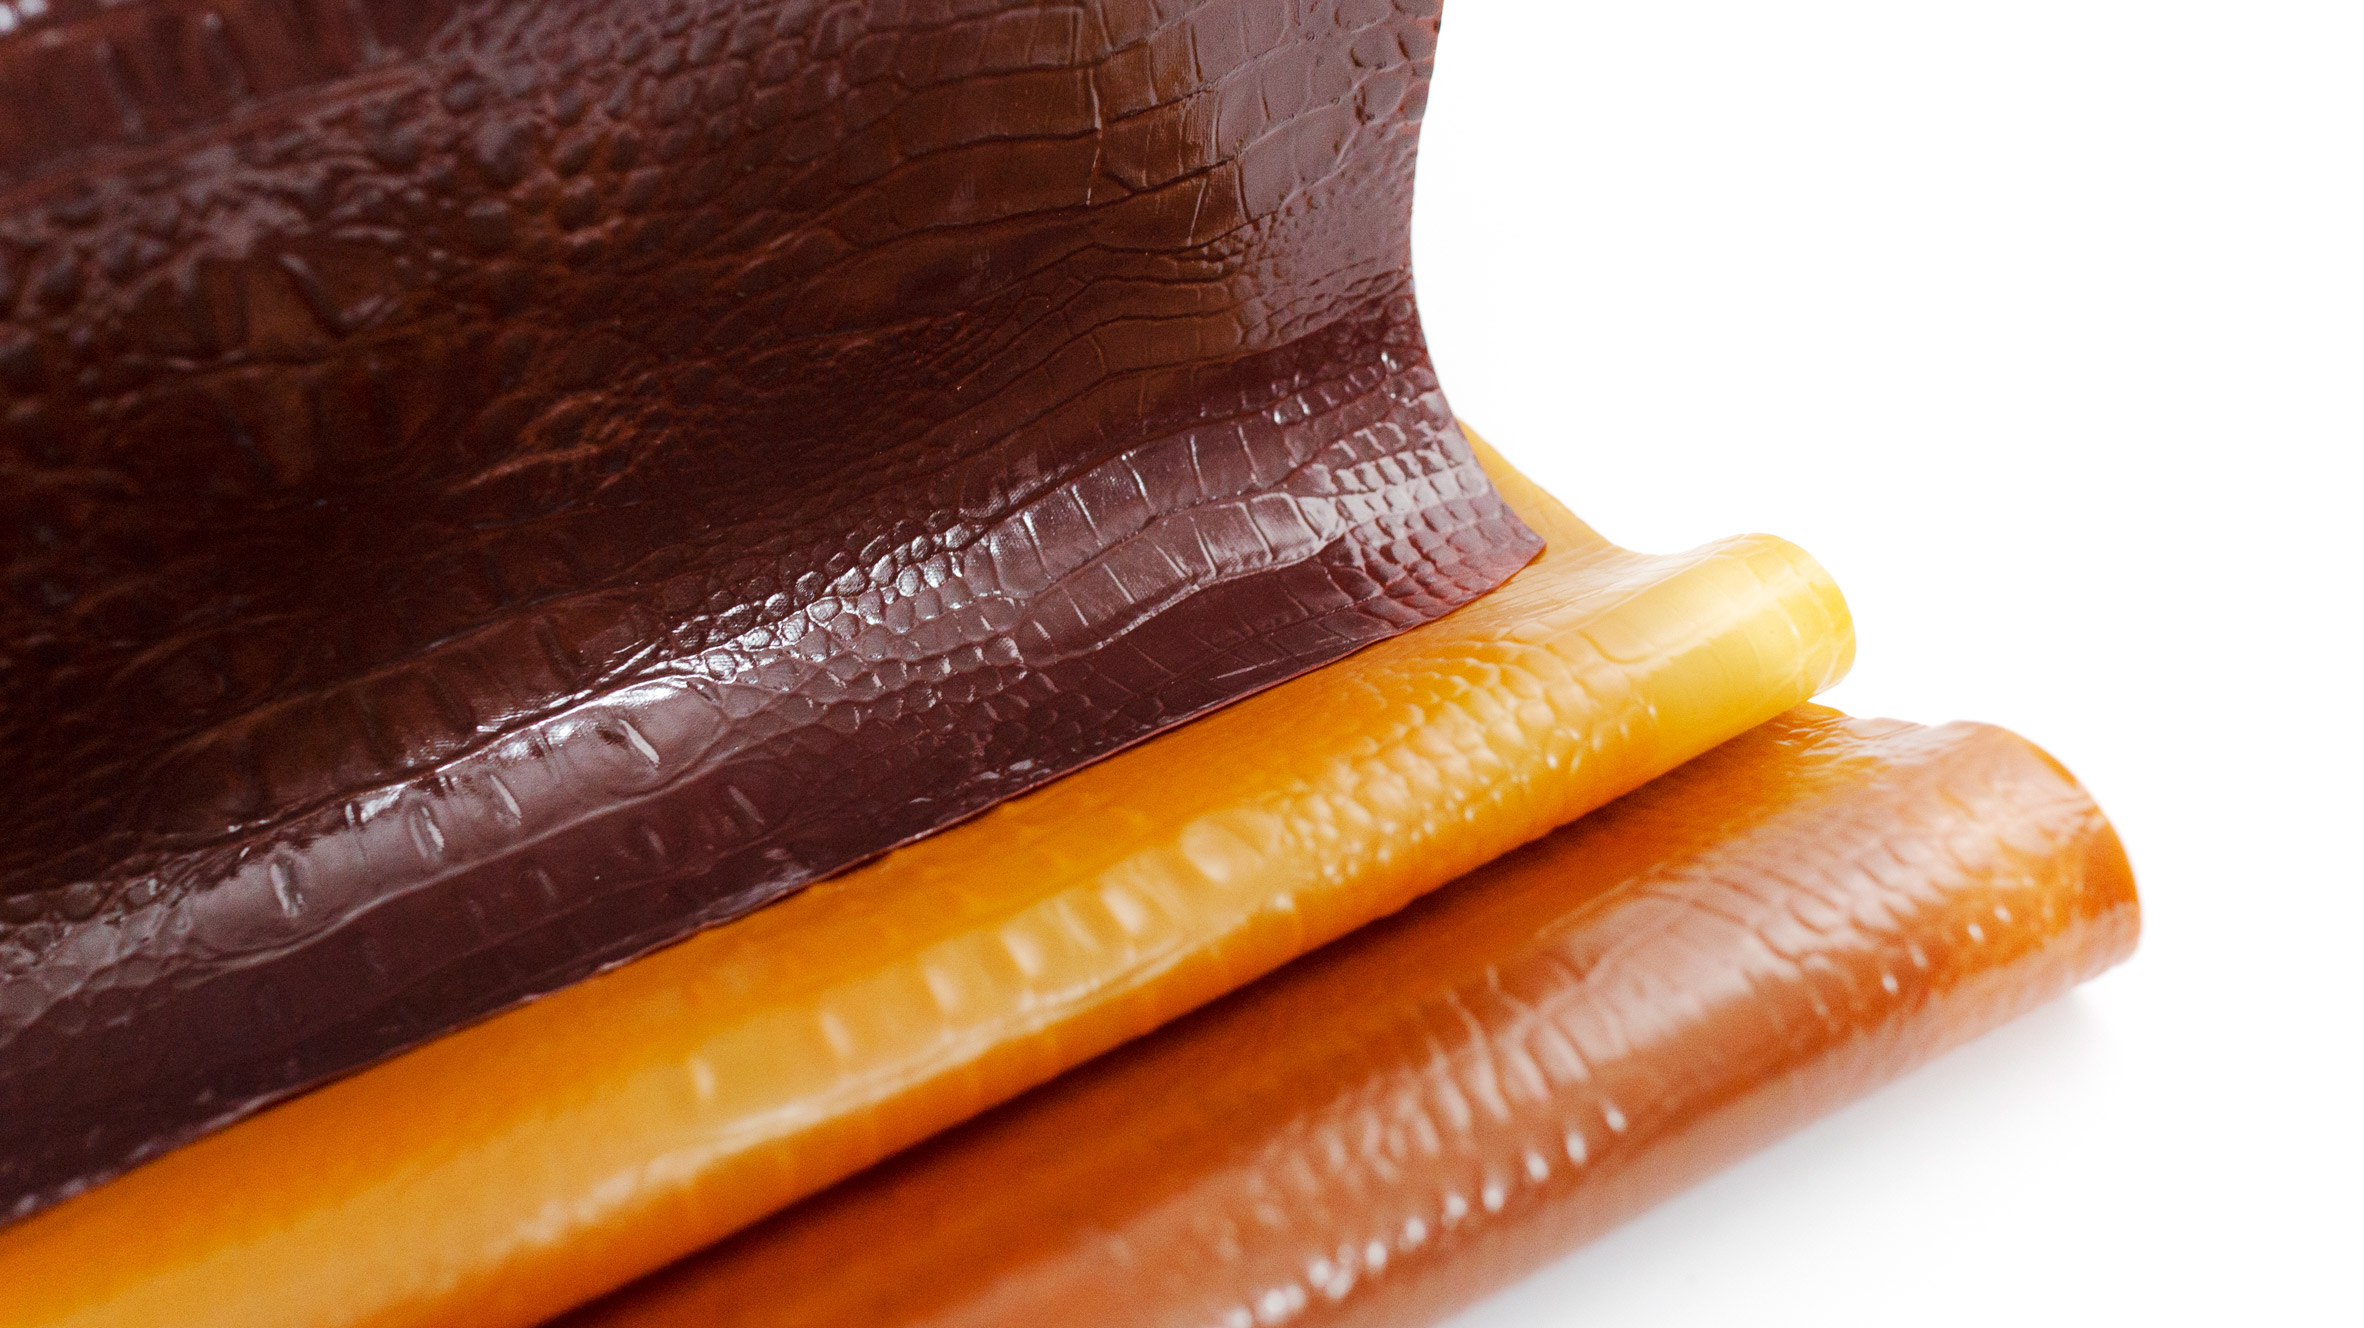 Tômtex is a leather alternative made from waste seafood shells and coffee